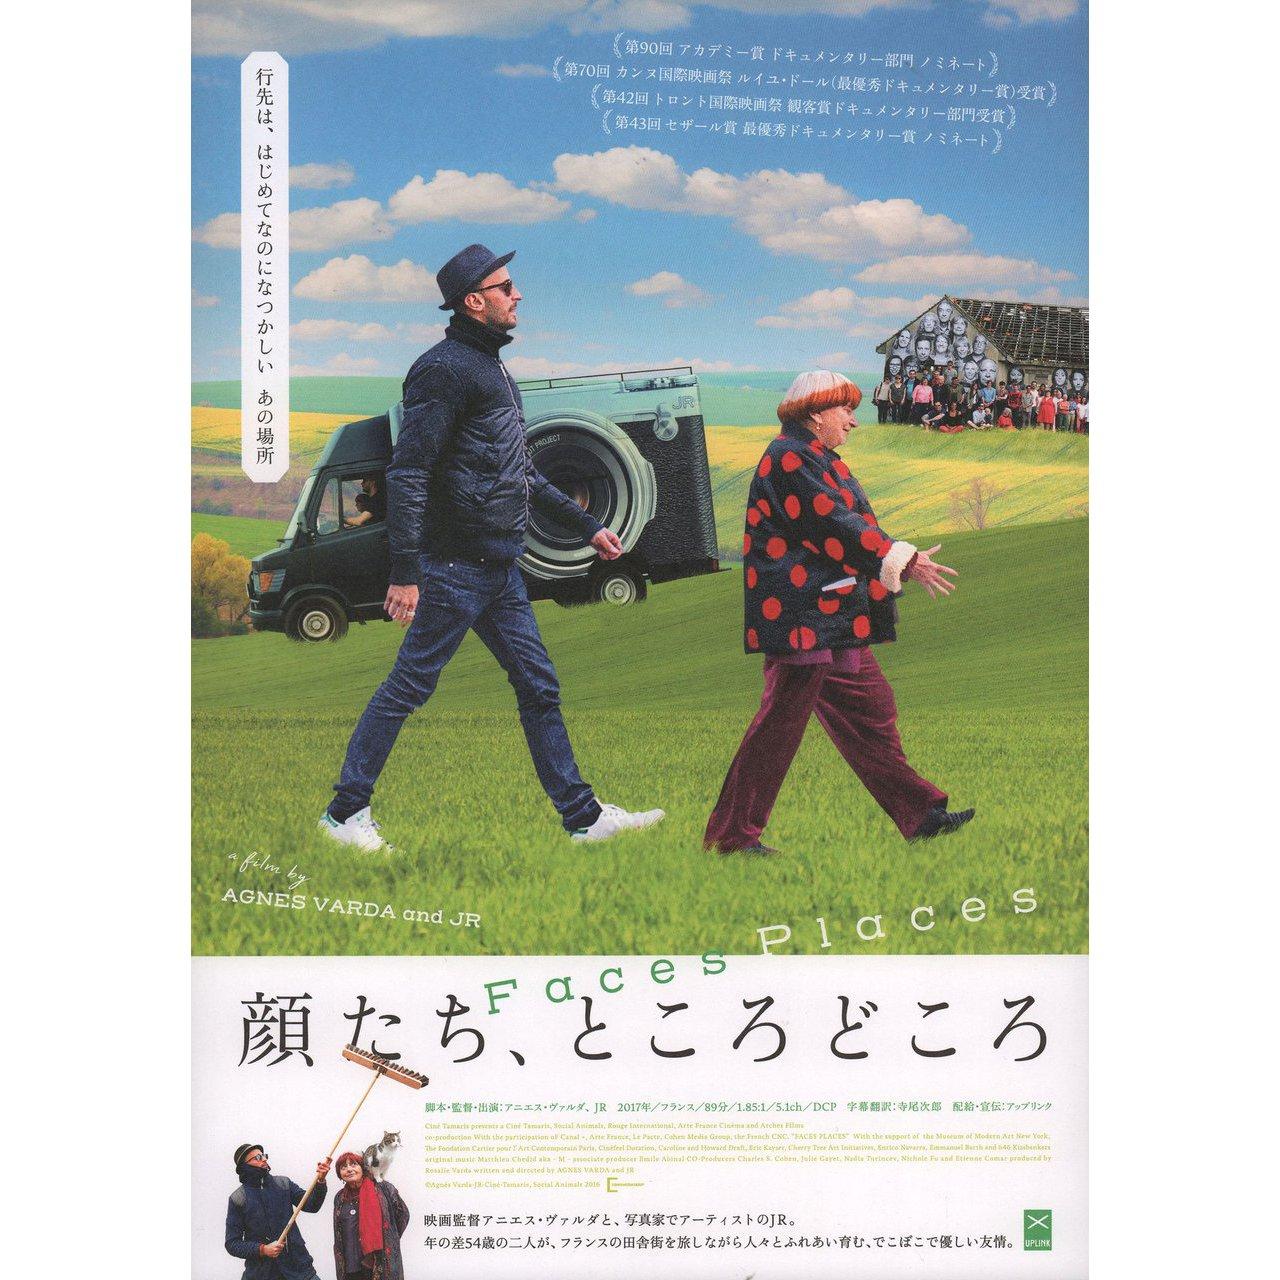 Original 2017 Japanese B2 poster for the documentary film “Faces Places” (Visages, villages) directed by JR / Agnes Varda with Agnes Varda / JR / Jeannine Carpentier / Clemens Van Dungern. Fine condition, rolled. Please note: the size is stated in